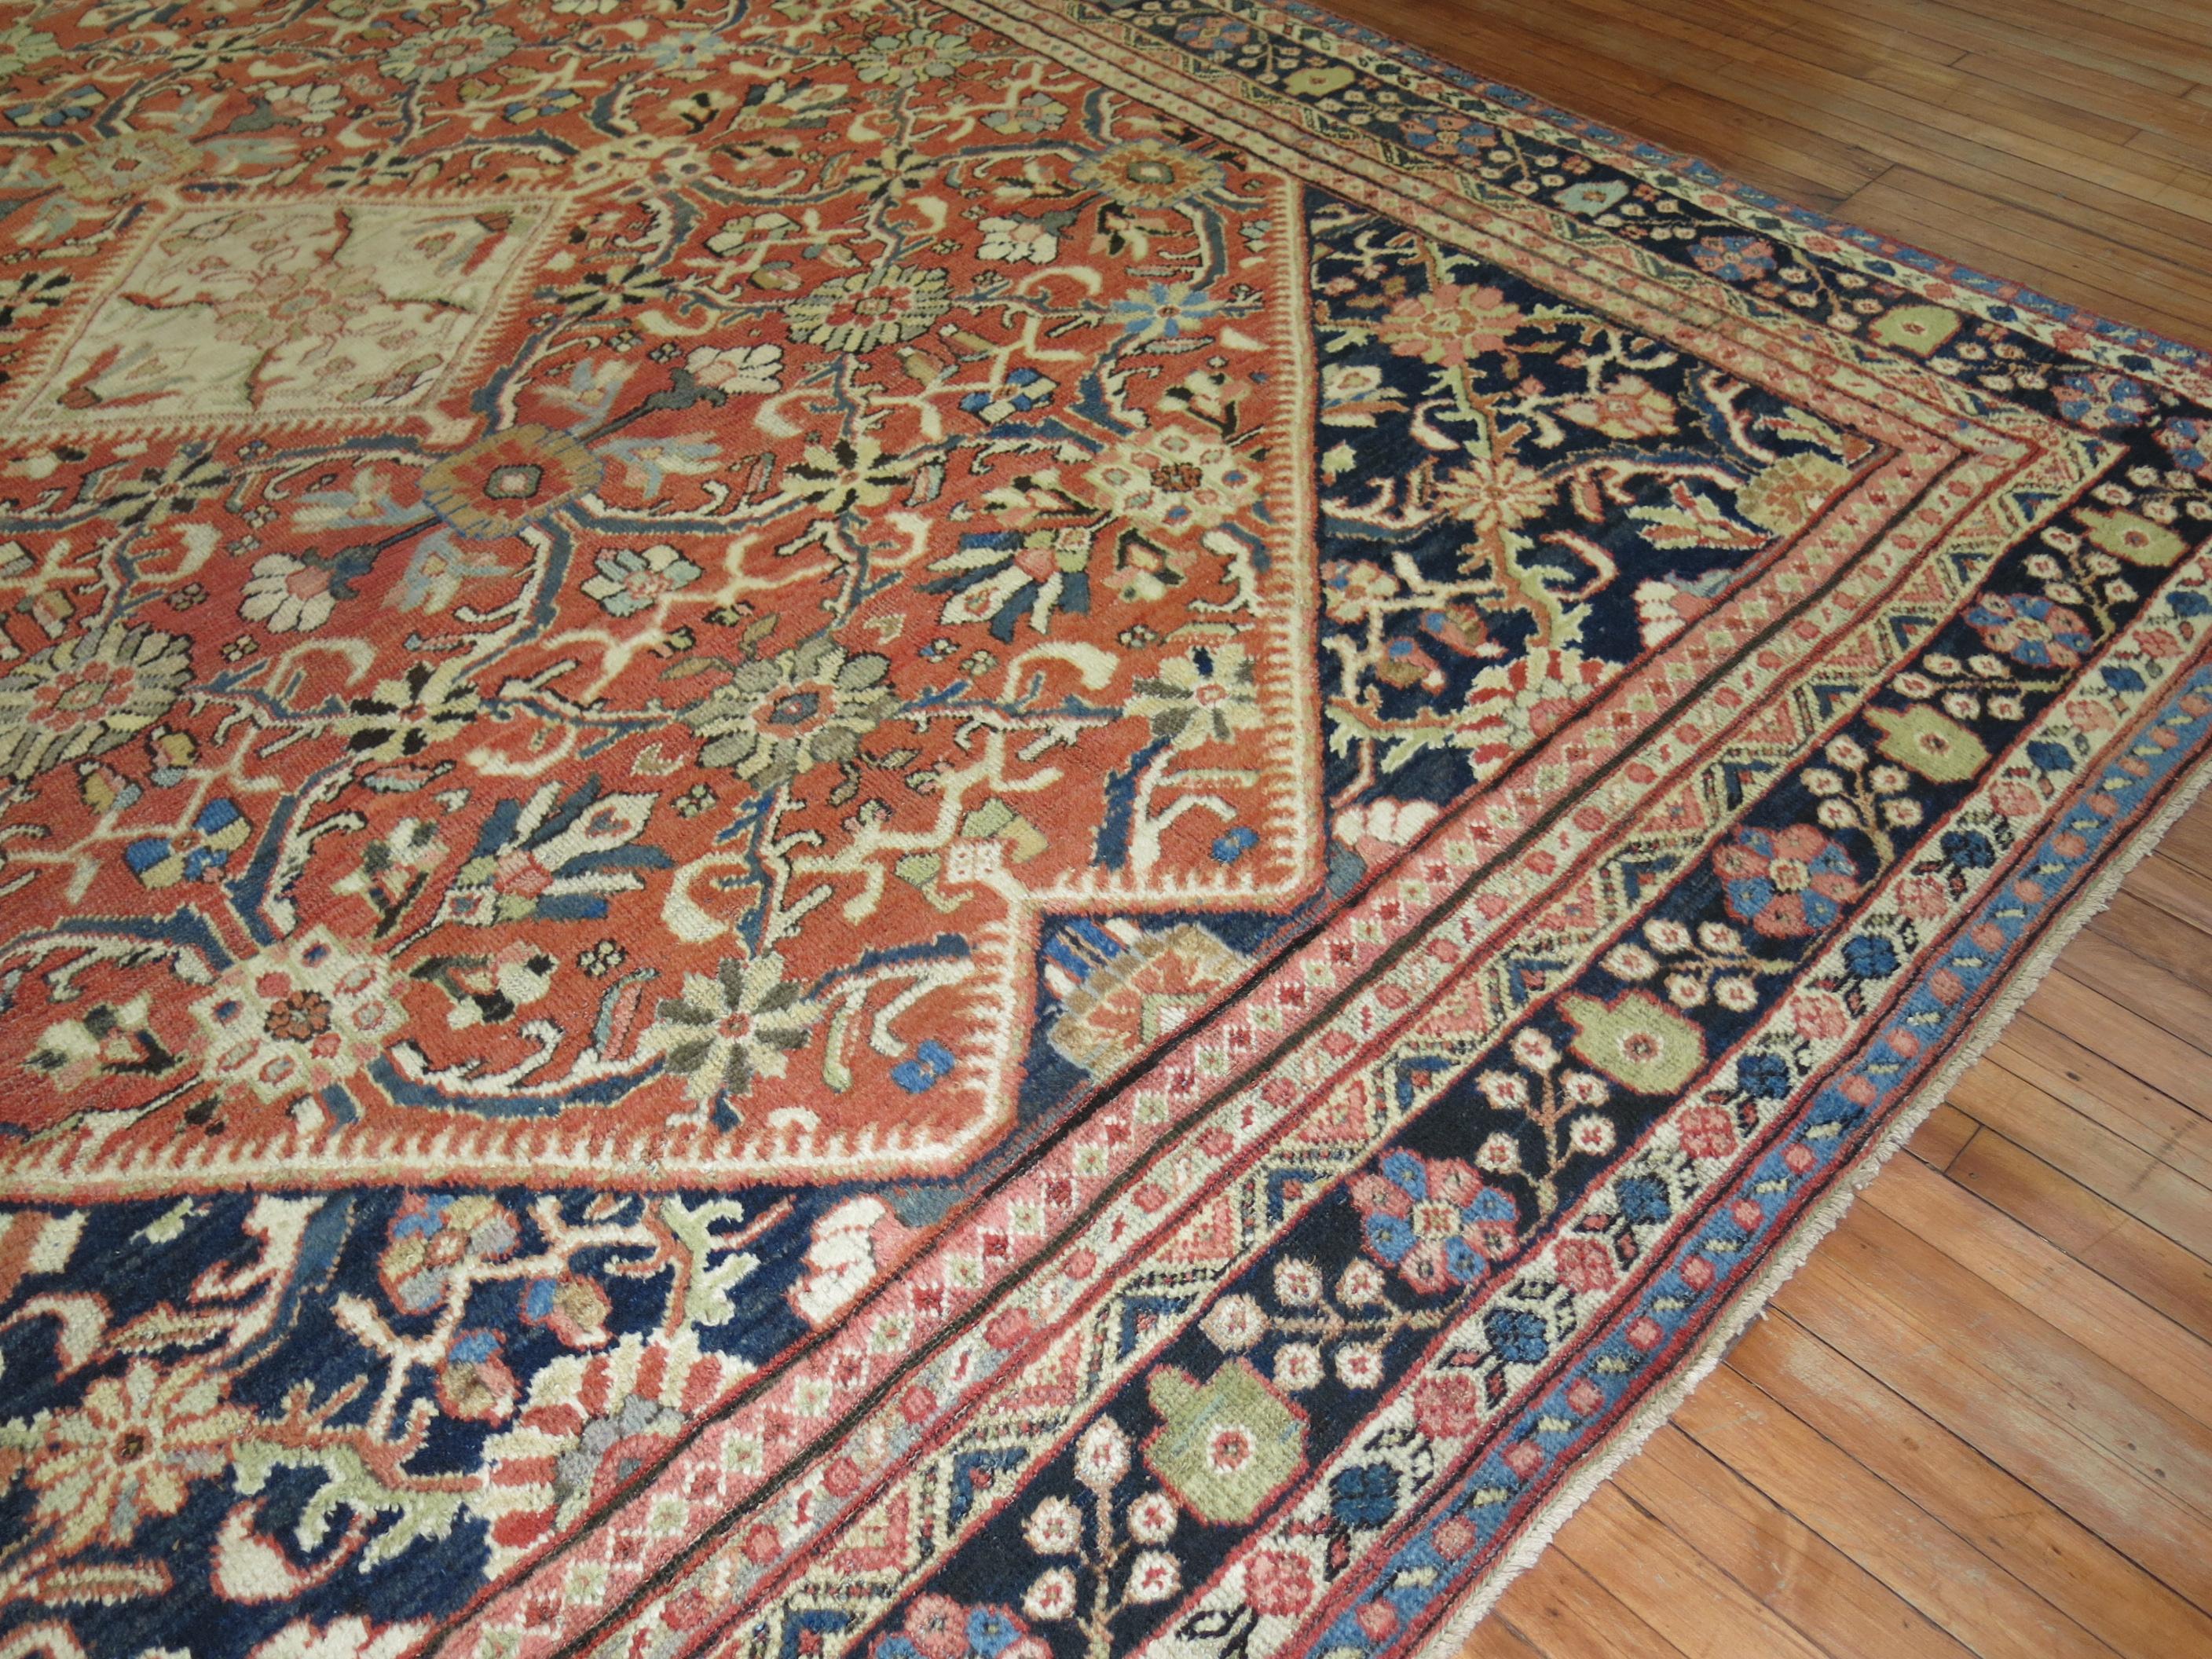 Room size early 20th century antique Persian Mahal rug with a traditional medallion, 4 corner, border design in rust, brick navy, and antique white.

Measures: 9'8” x 12'3